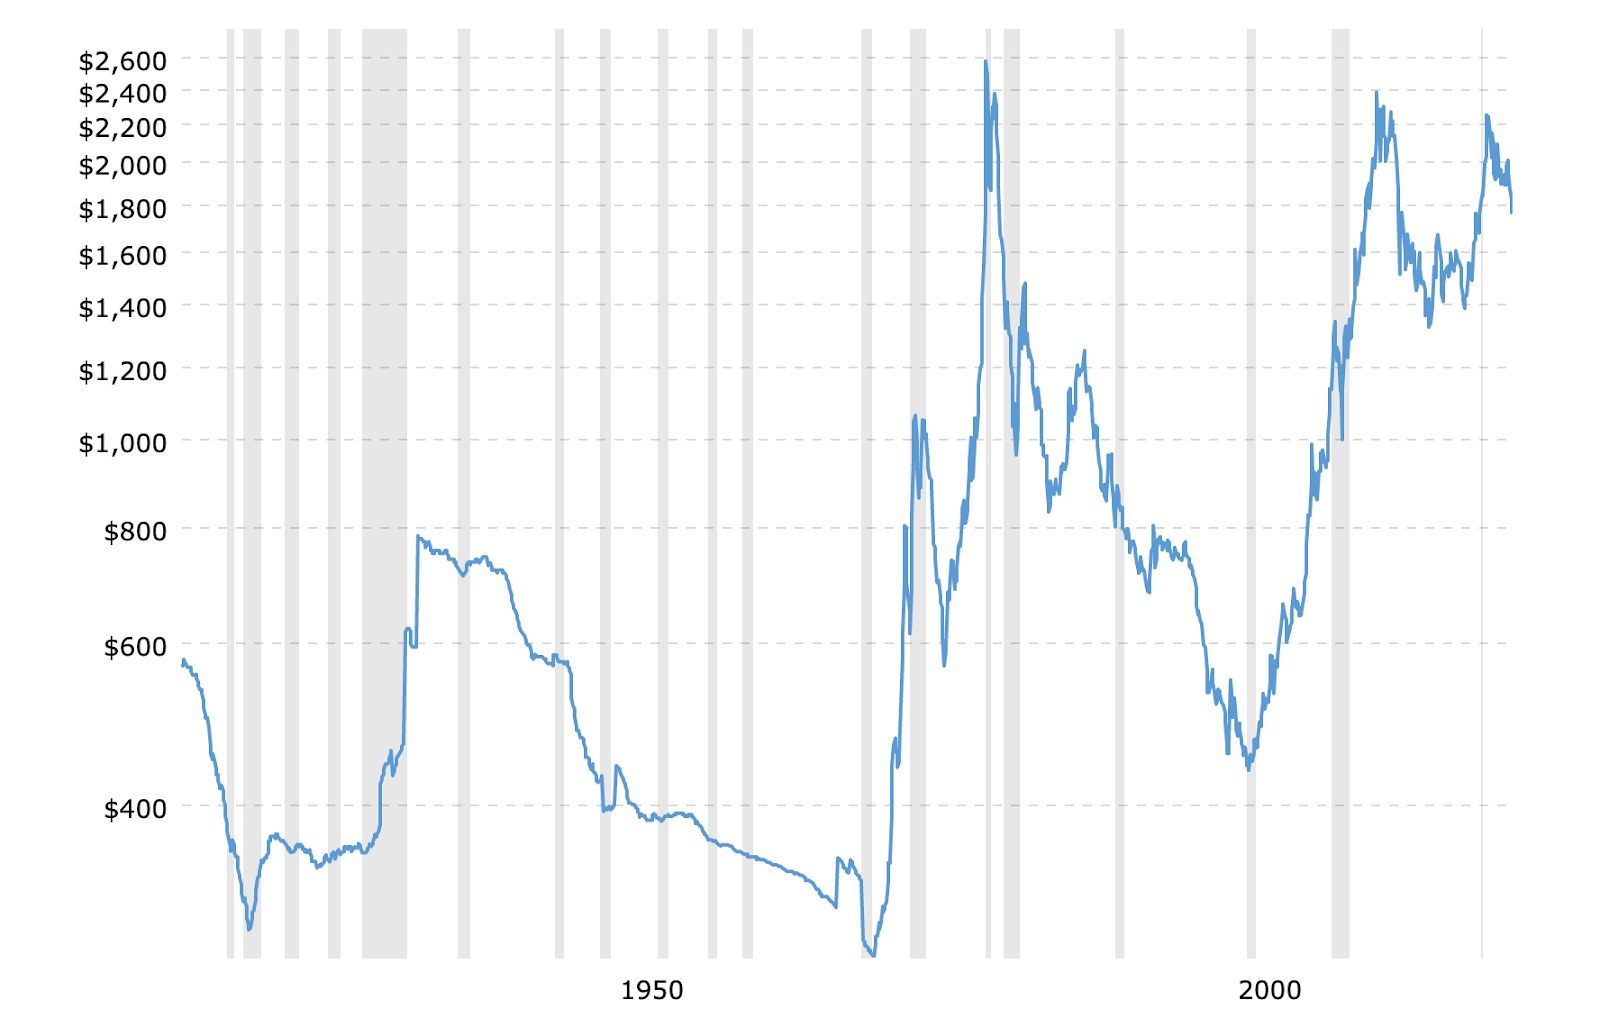 Gold Prices - 100-Year Historical Chart